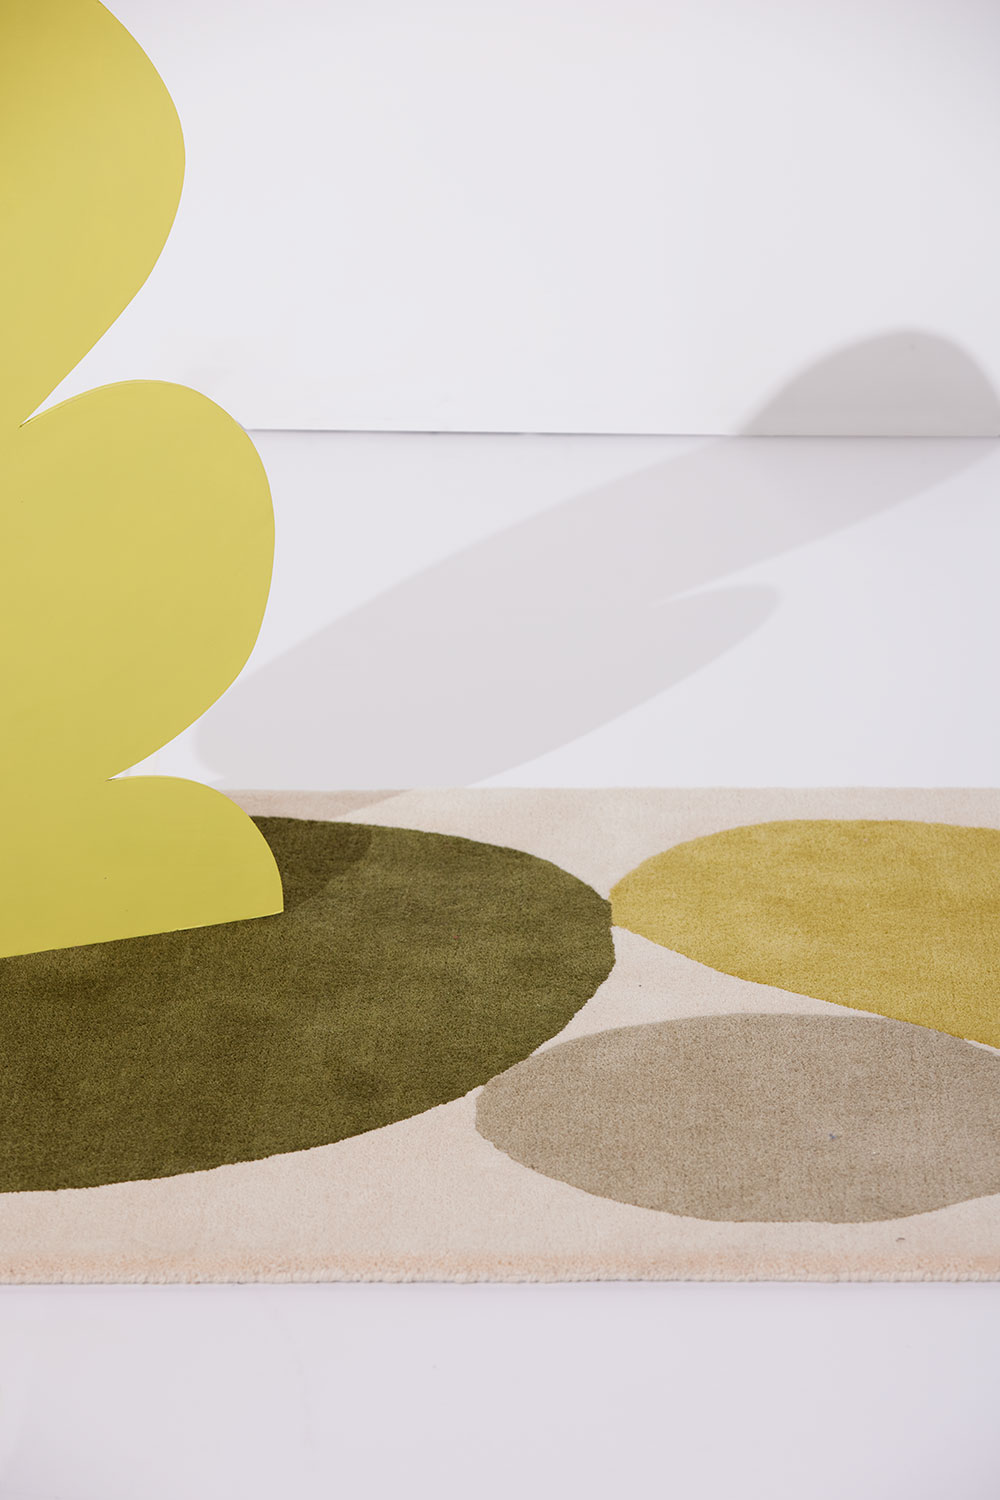 A cropped look at a 3 foot by 5 foot modern rug called Three Stones Moss